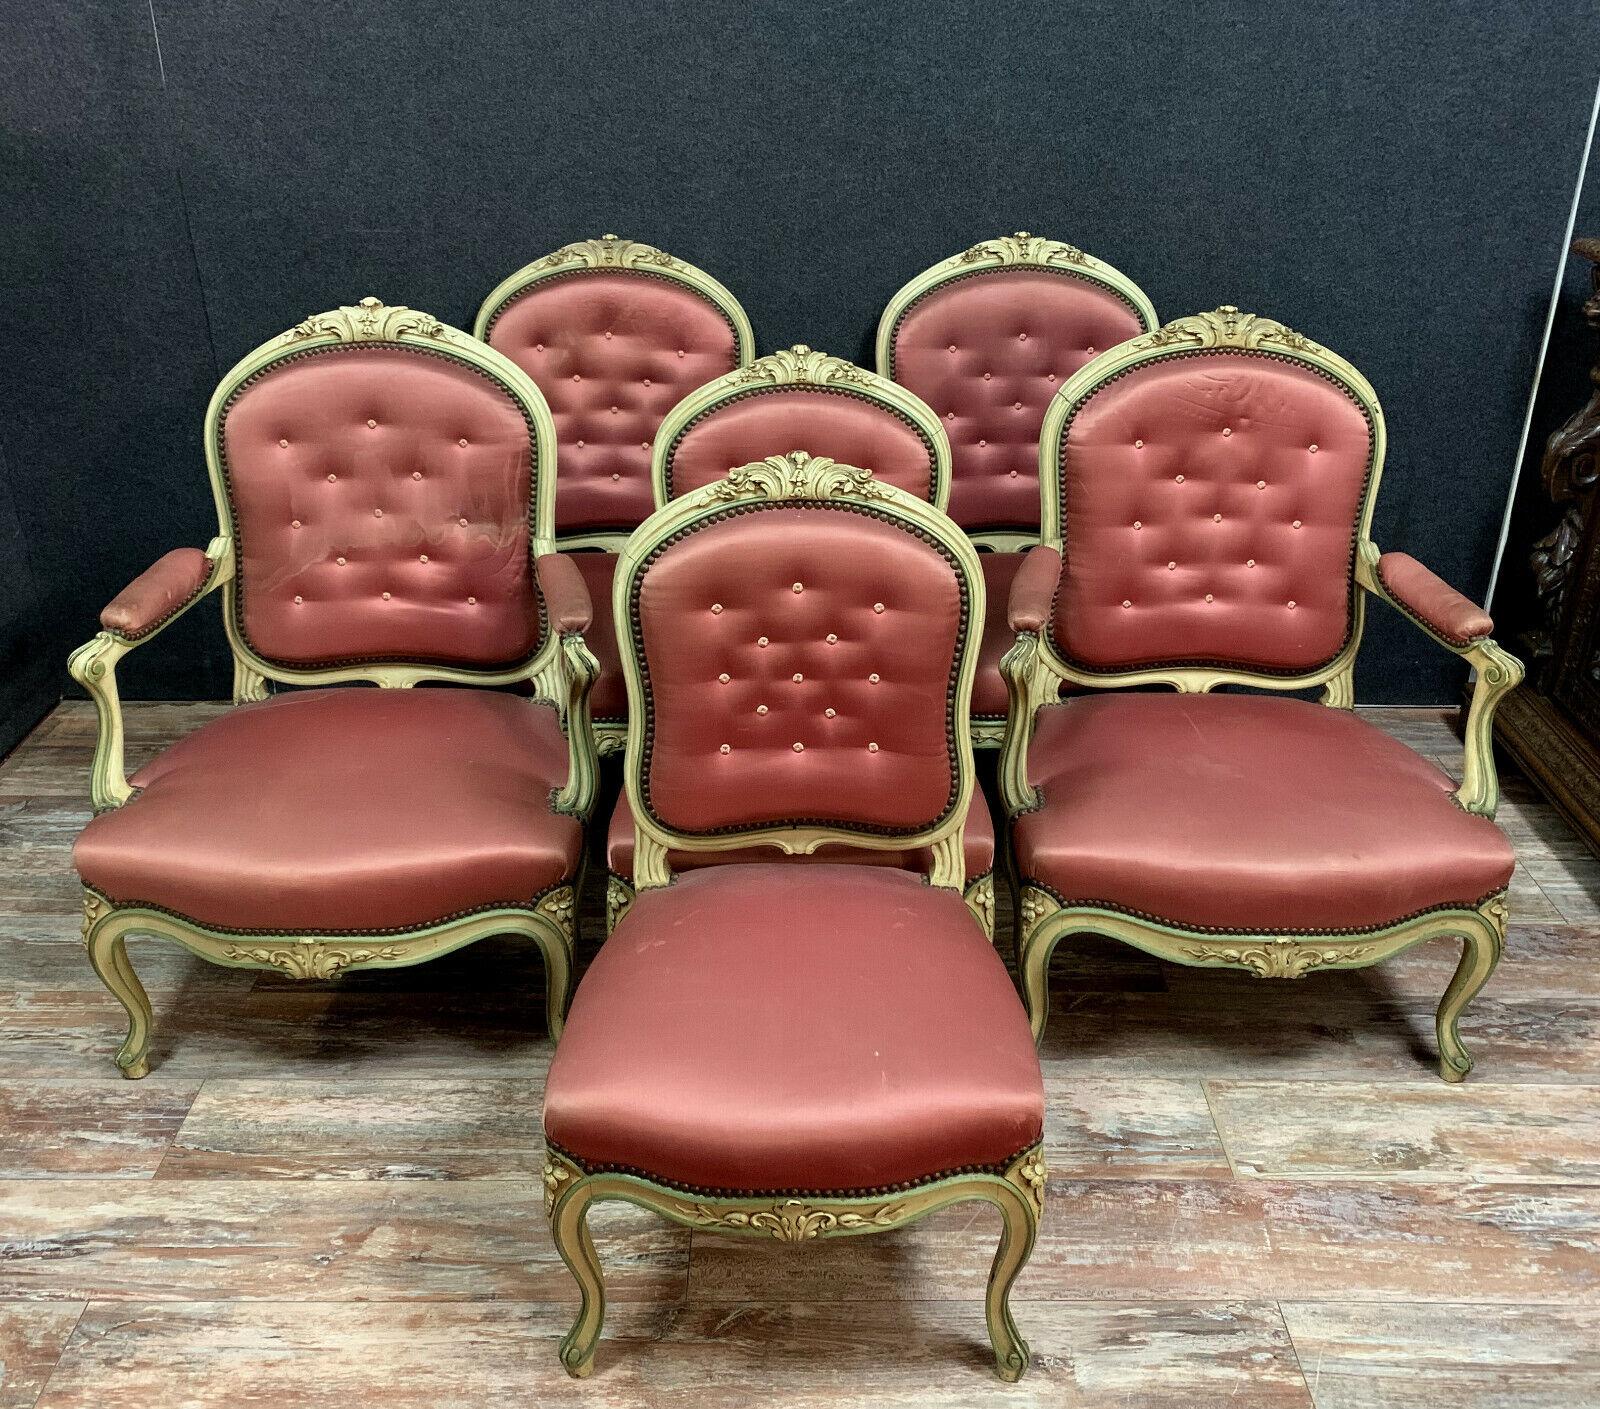 Louis XV Lacquered Wood Salon Furniture Set with 4 Armchairs and 2 Chairs -1X01 For Sale 4